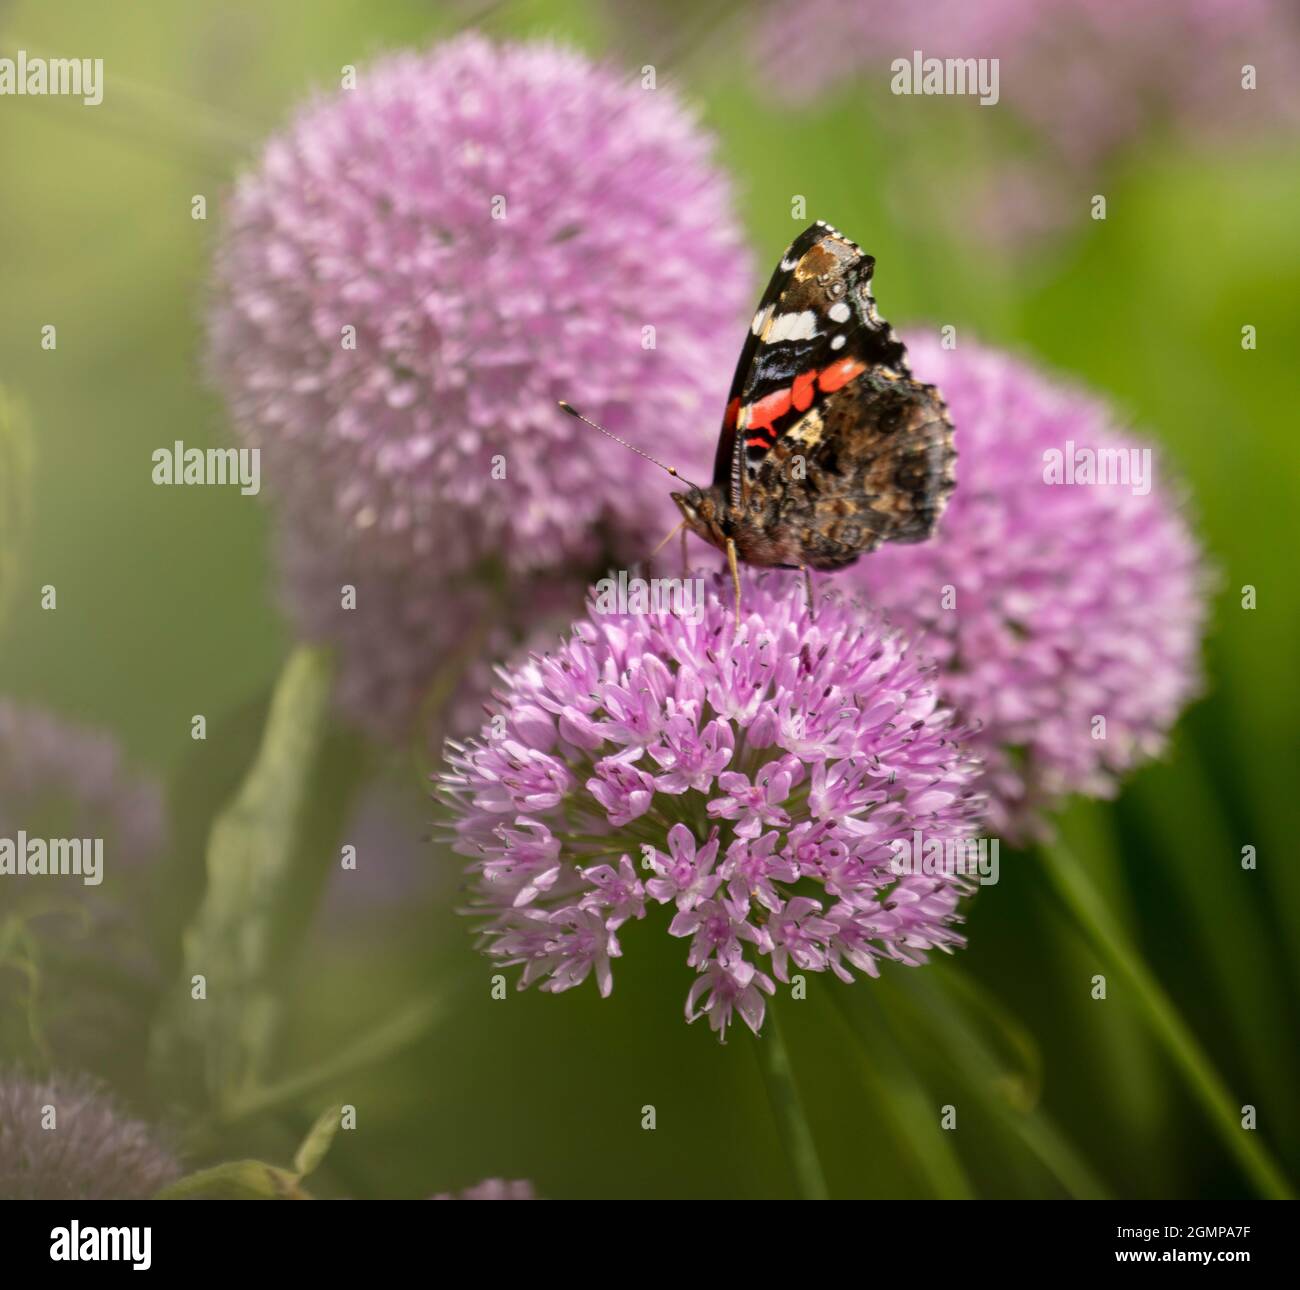 Colourful butterfly feeding on round flowers Stock Photo